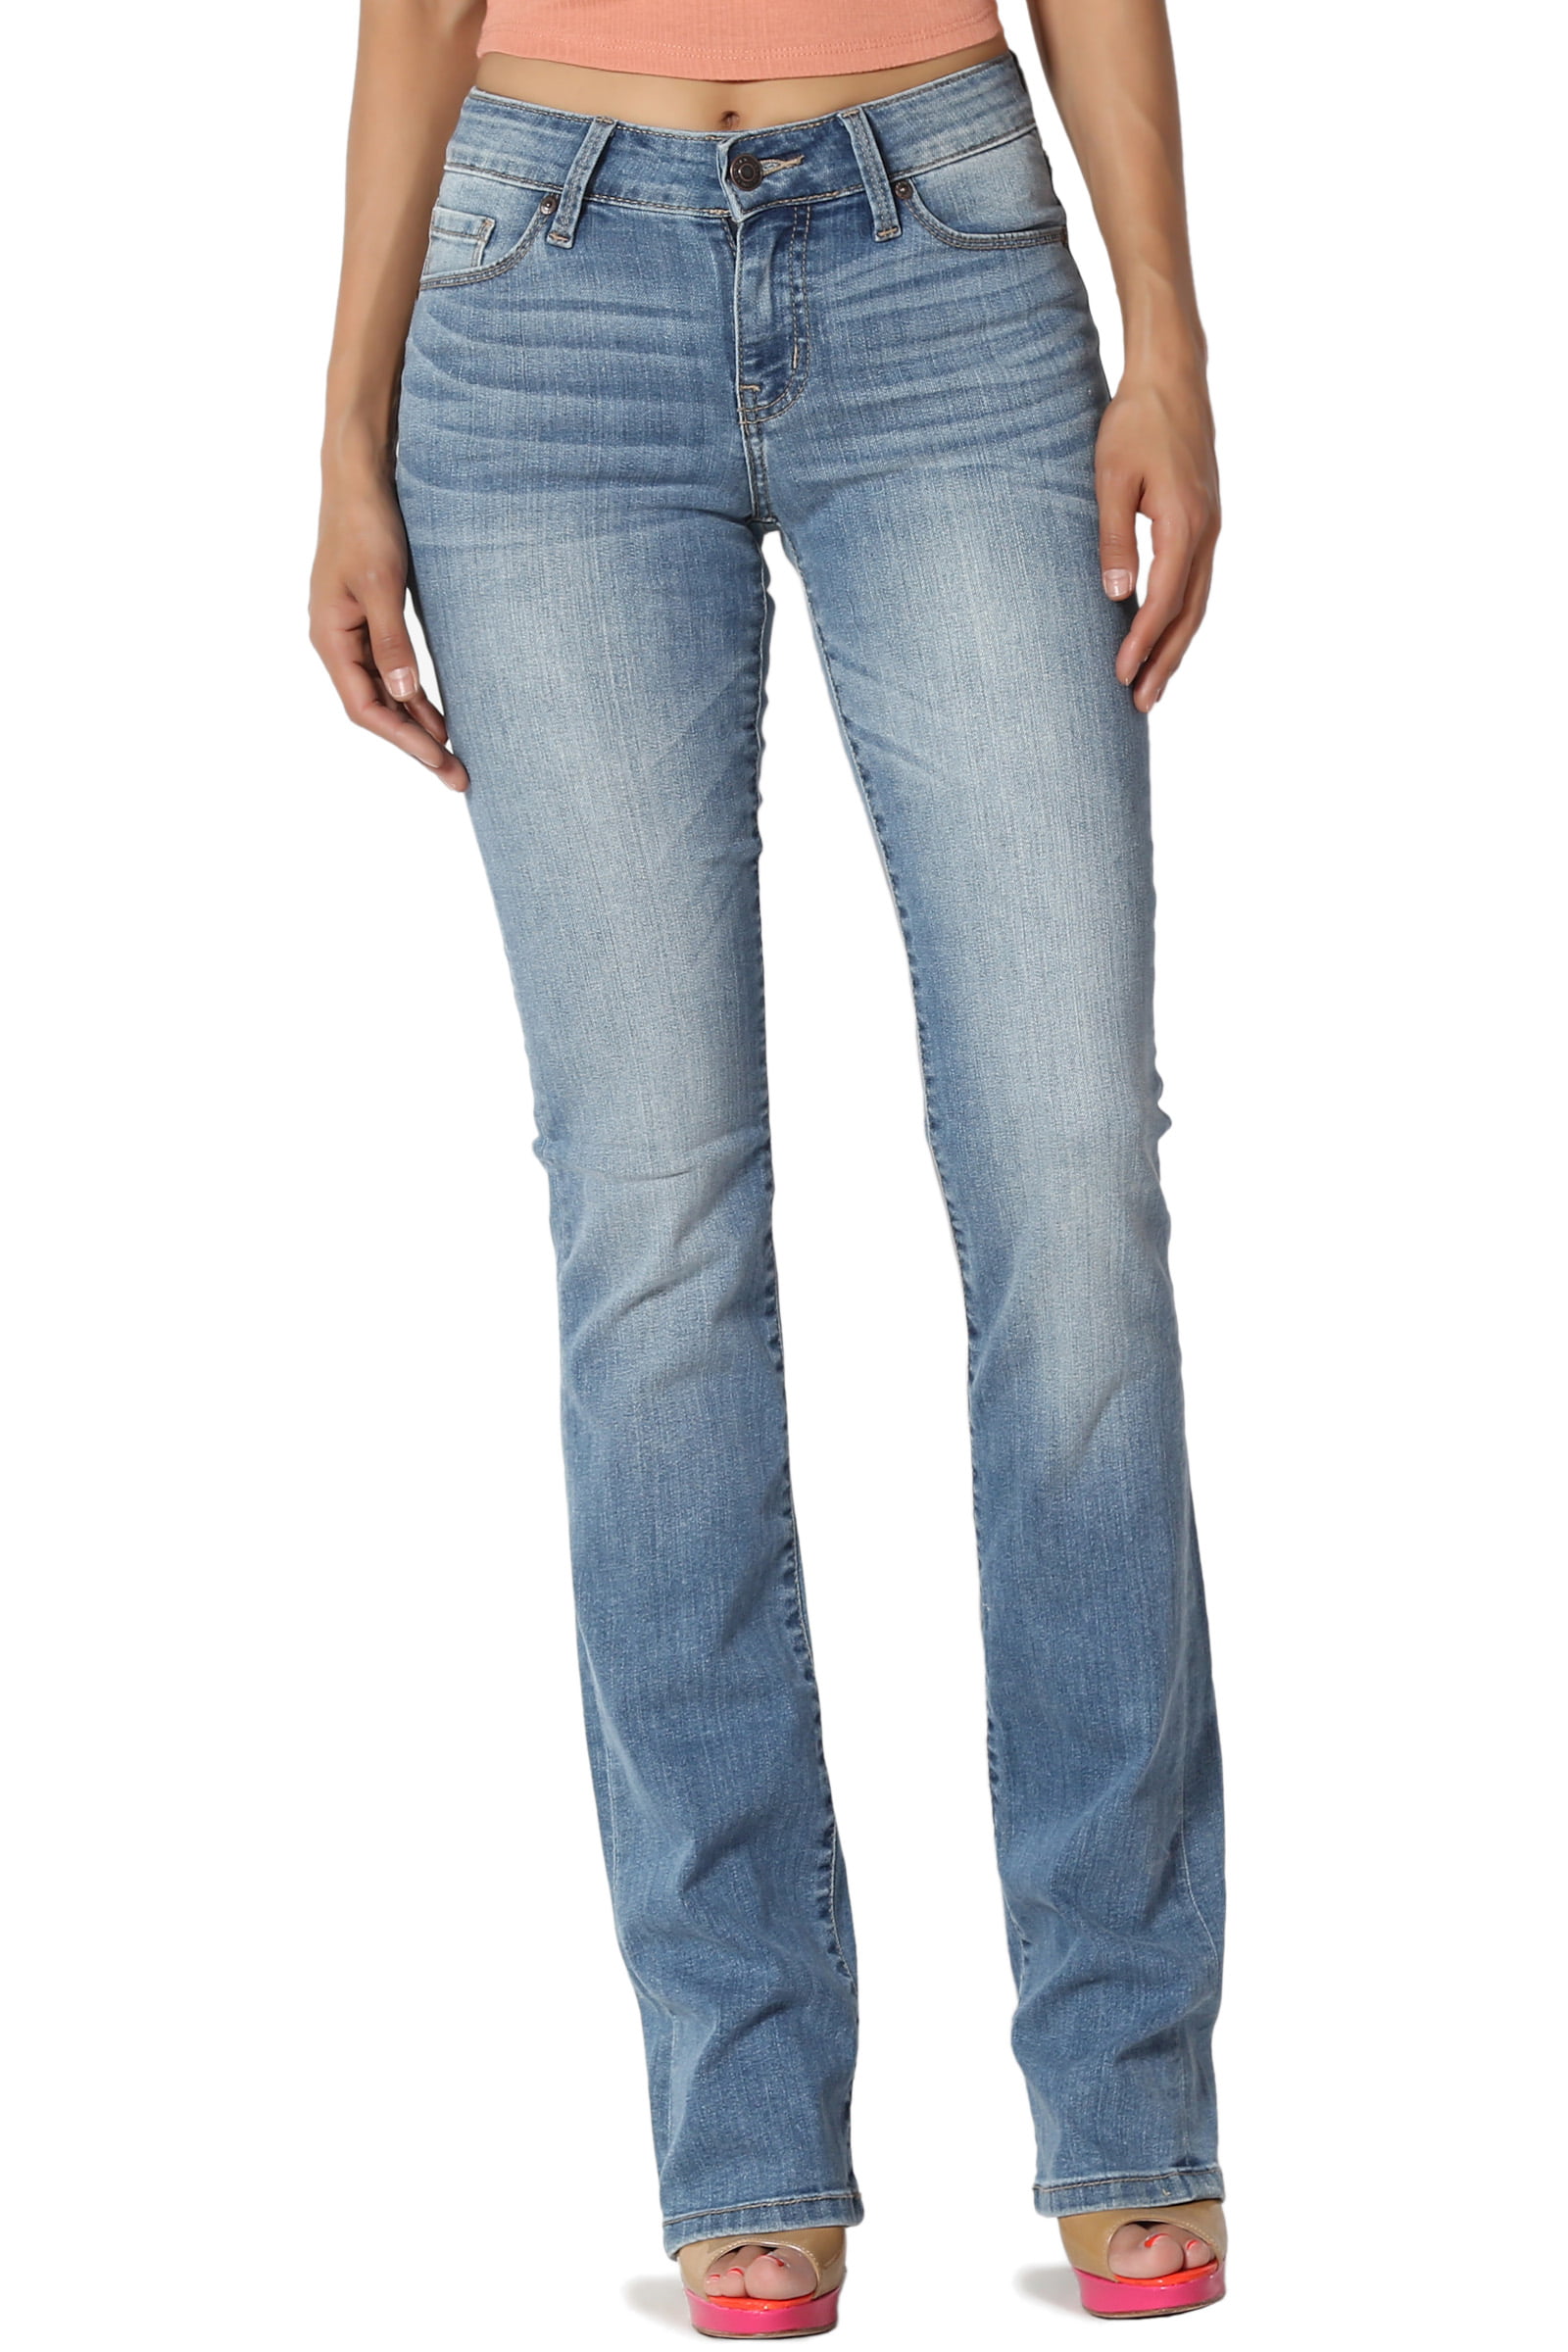 slim fit bootcut jeans womens